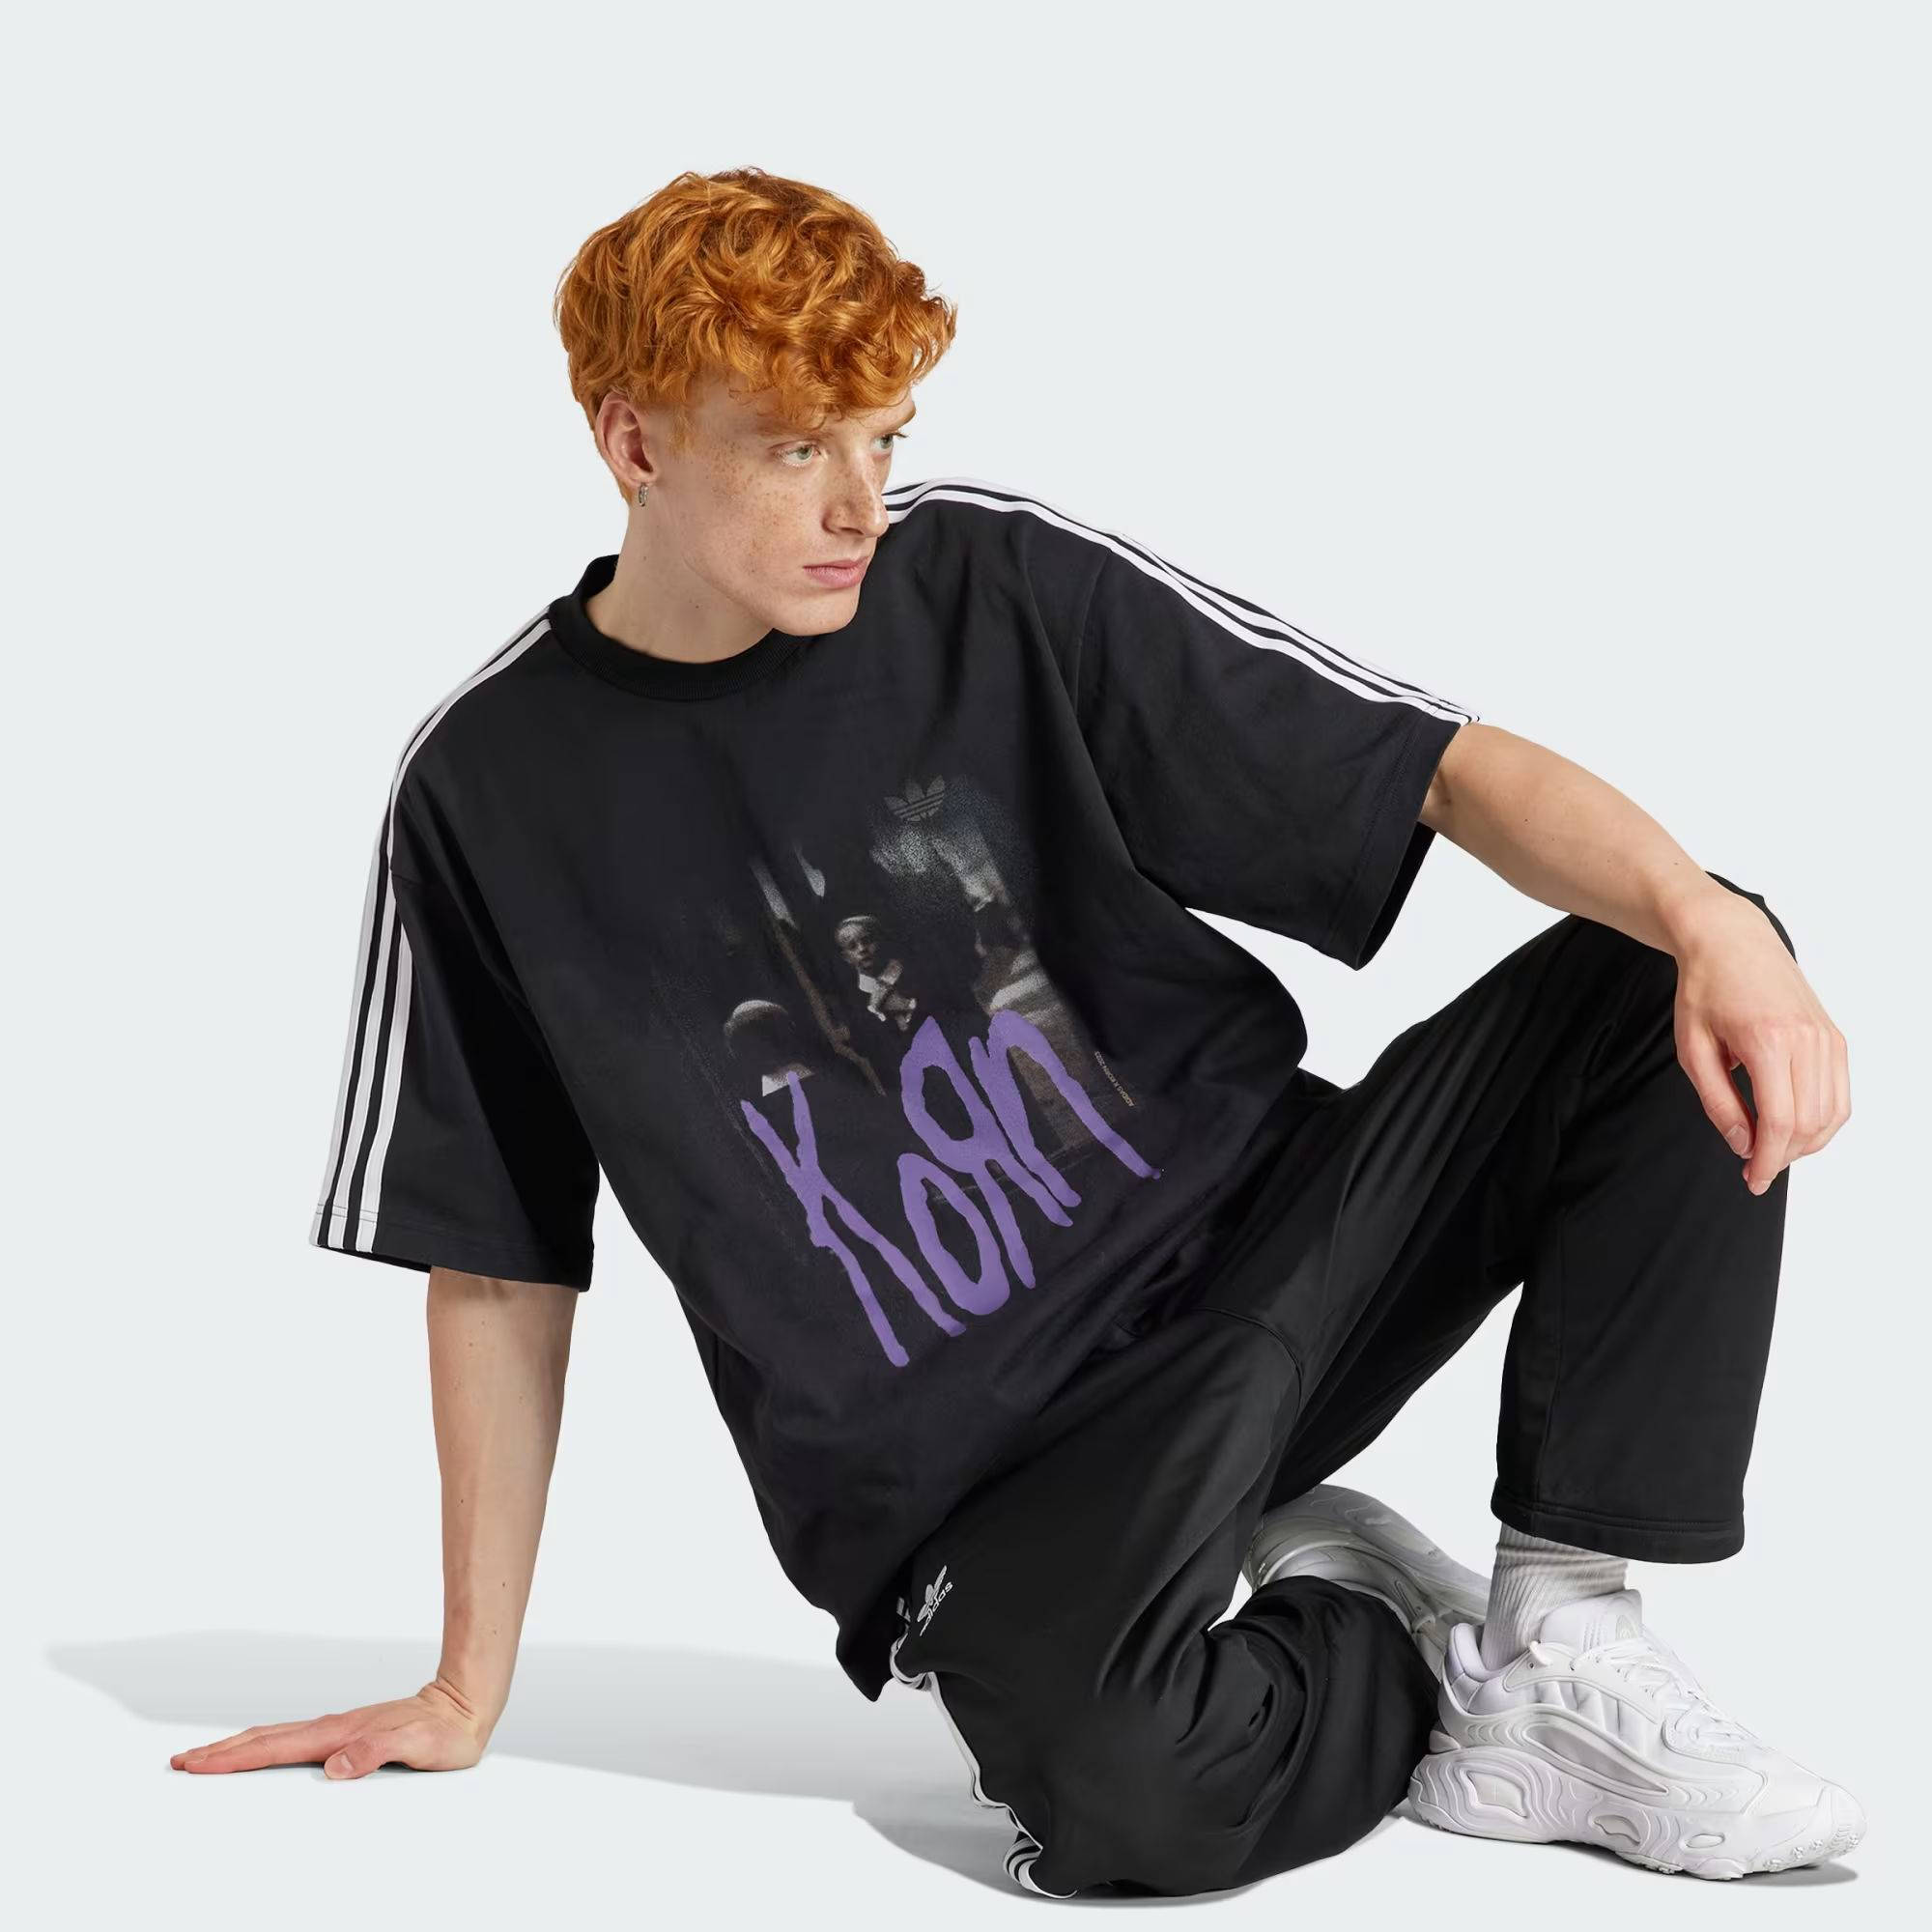 Korn x adidas Graphic T-Shirt | Where To Buy | IN9099 | The